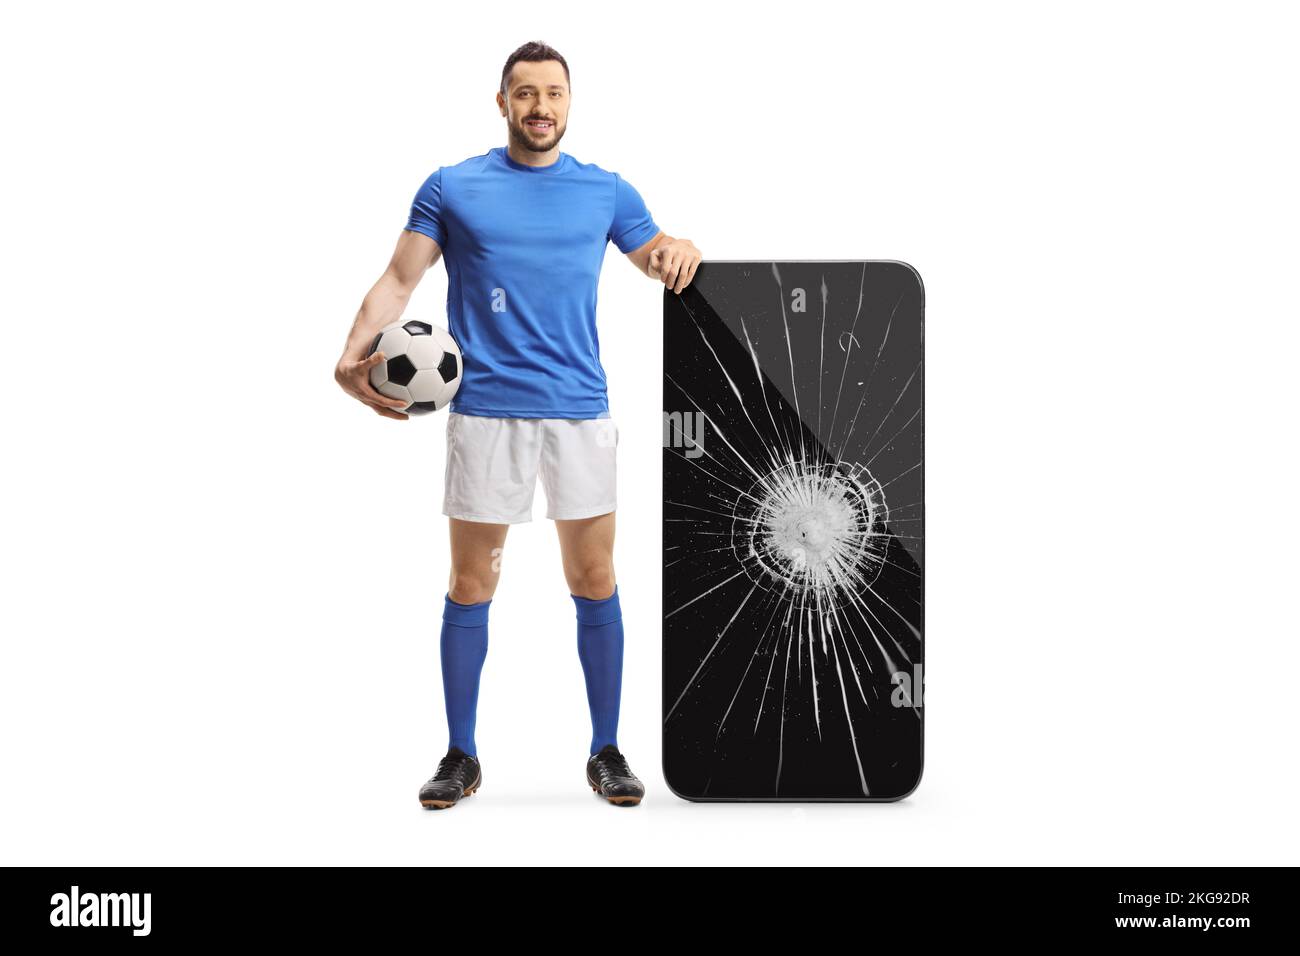 Full length portrait of a football player standing next to a big smartphone with broken screen isolated on white background Stock Photo